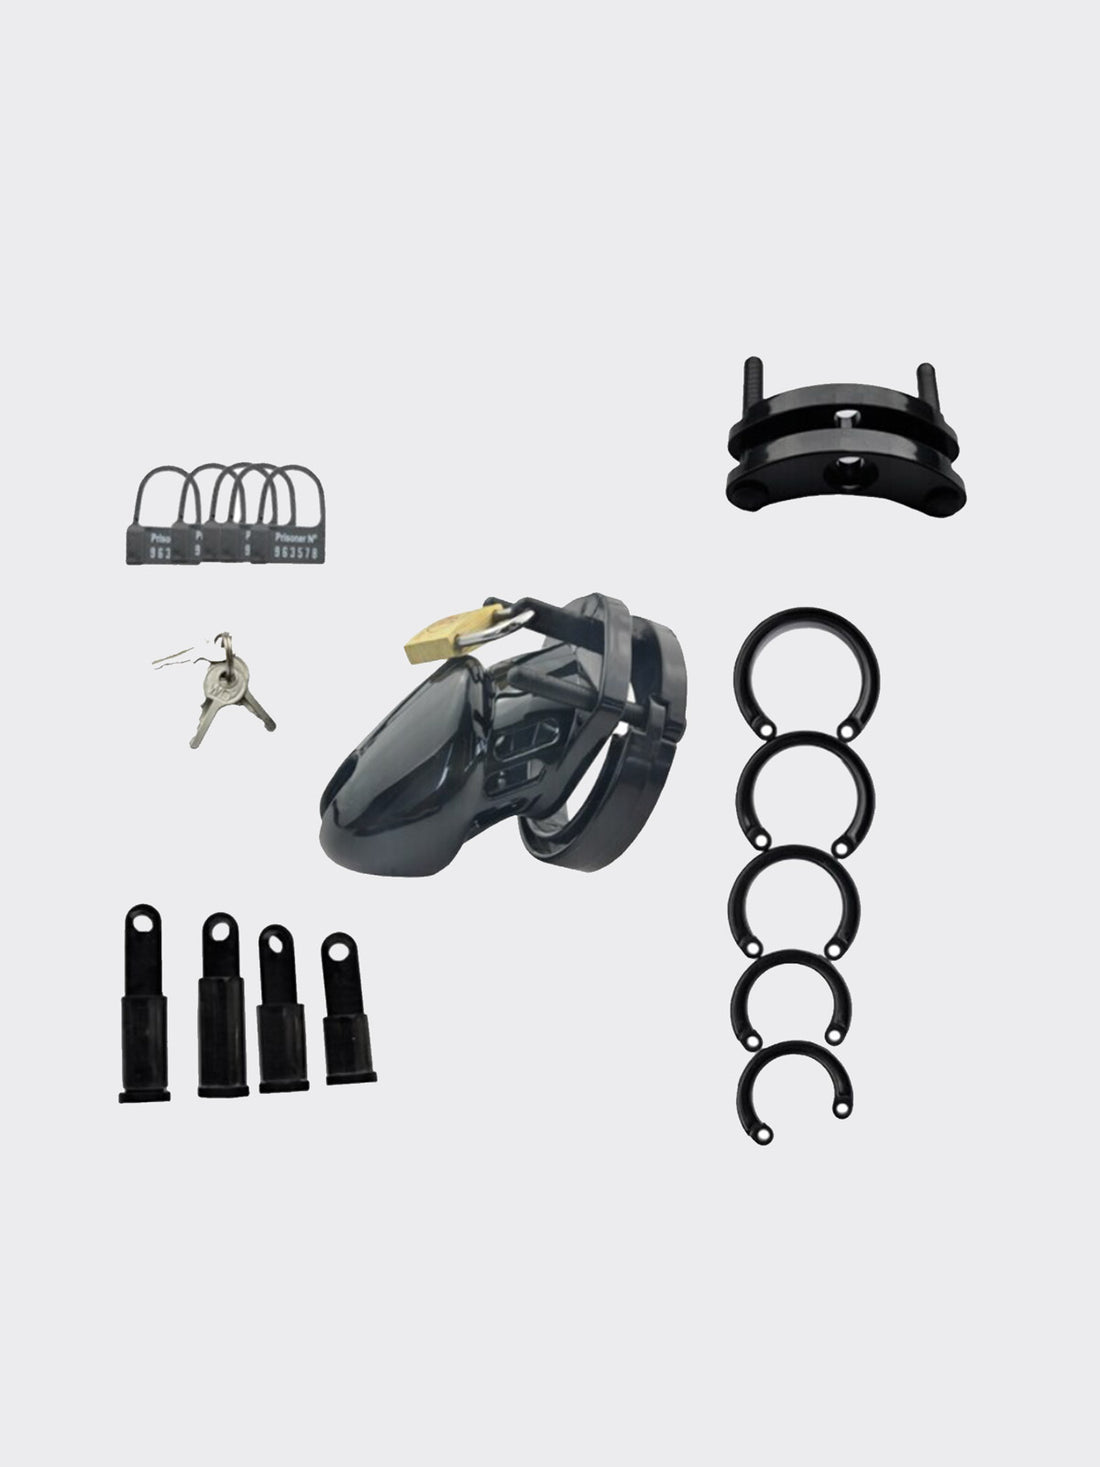 All the parts of a plastic chastity cage that fits onto your body then locks